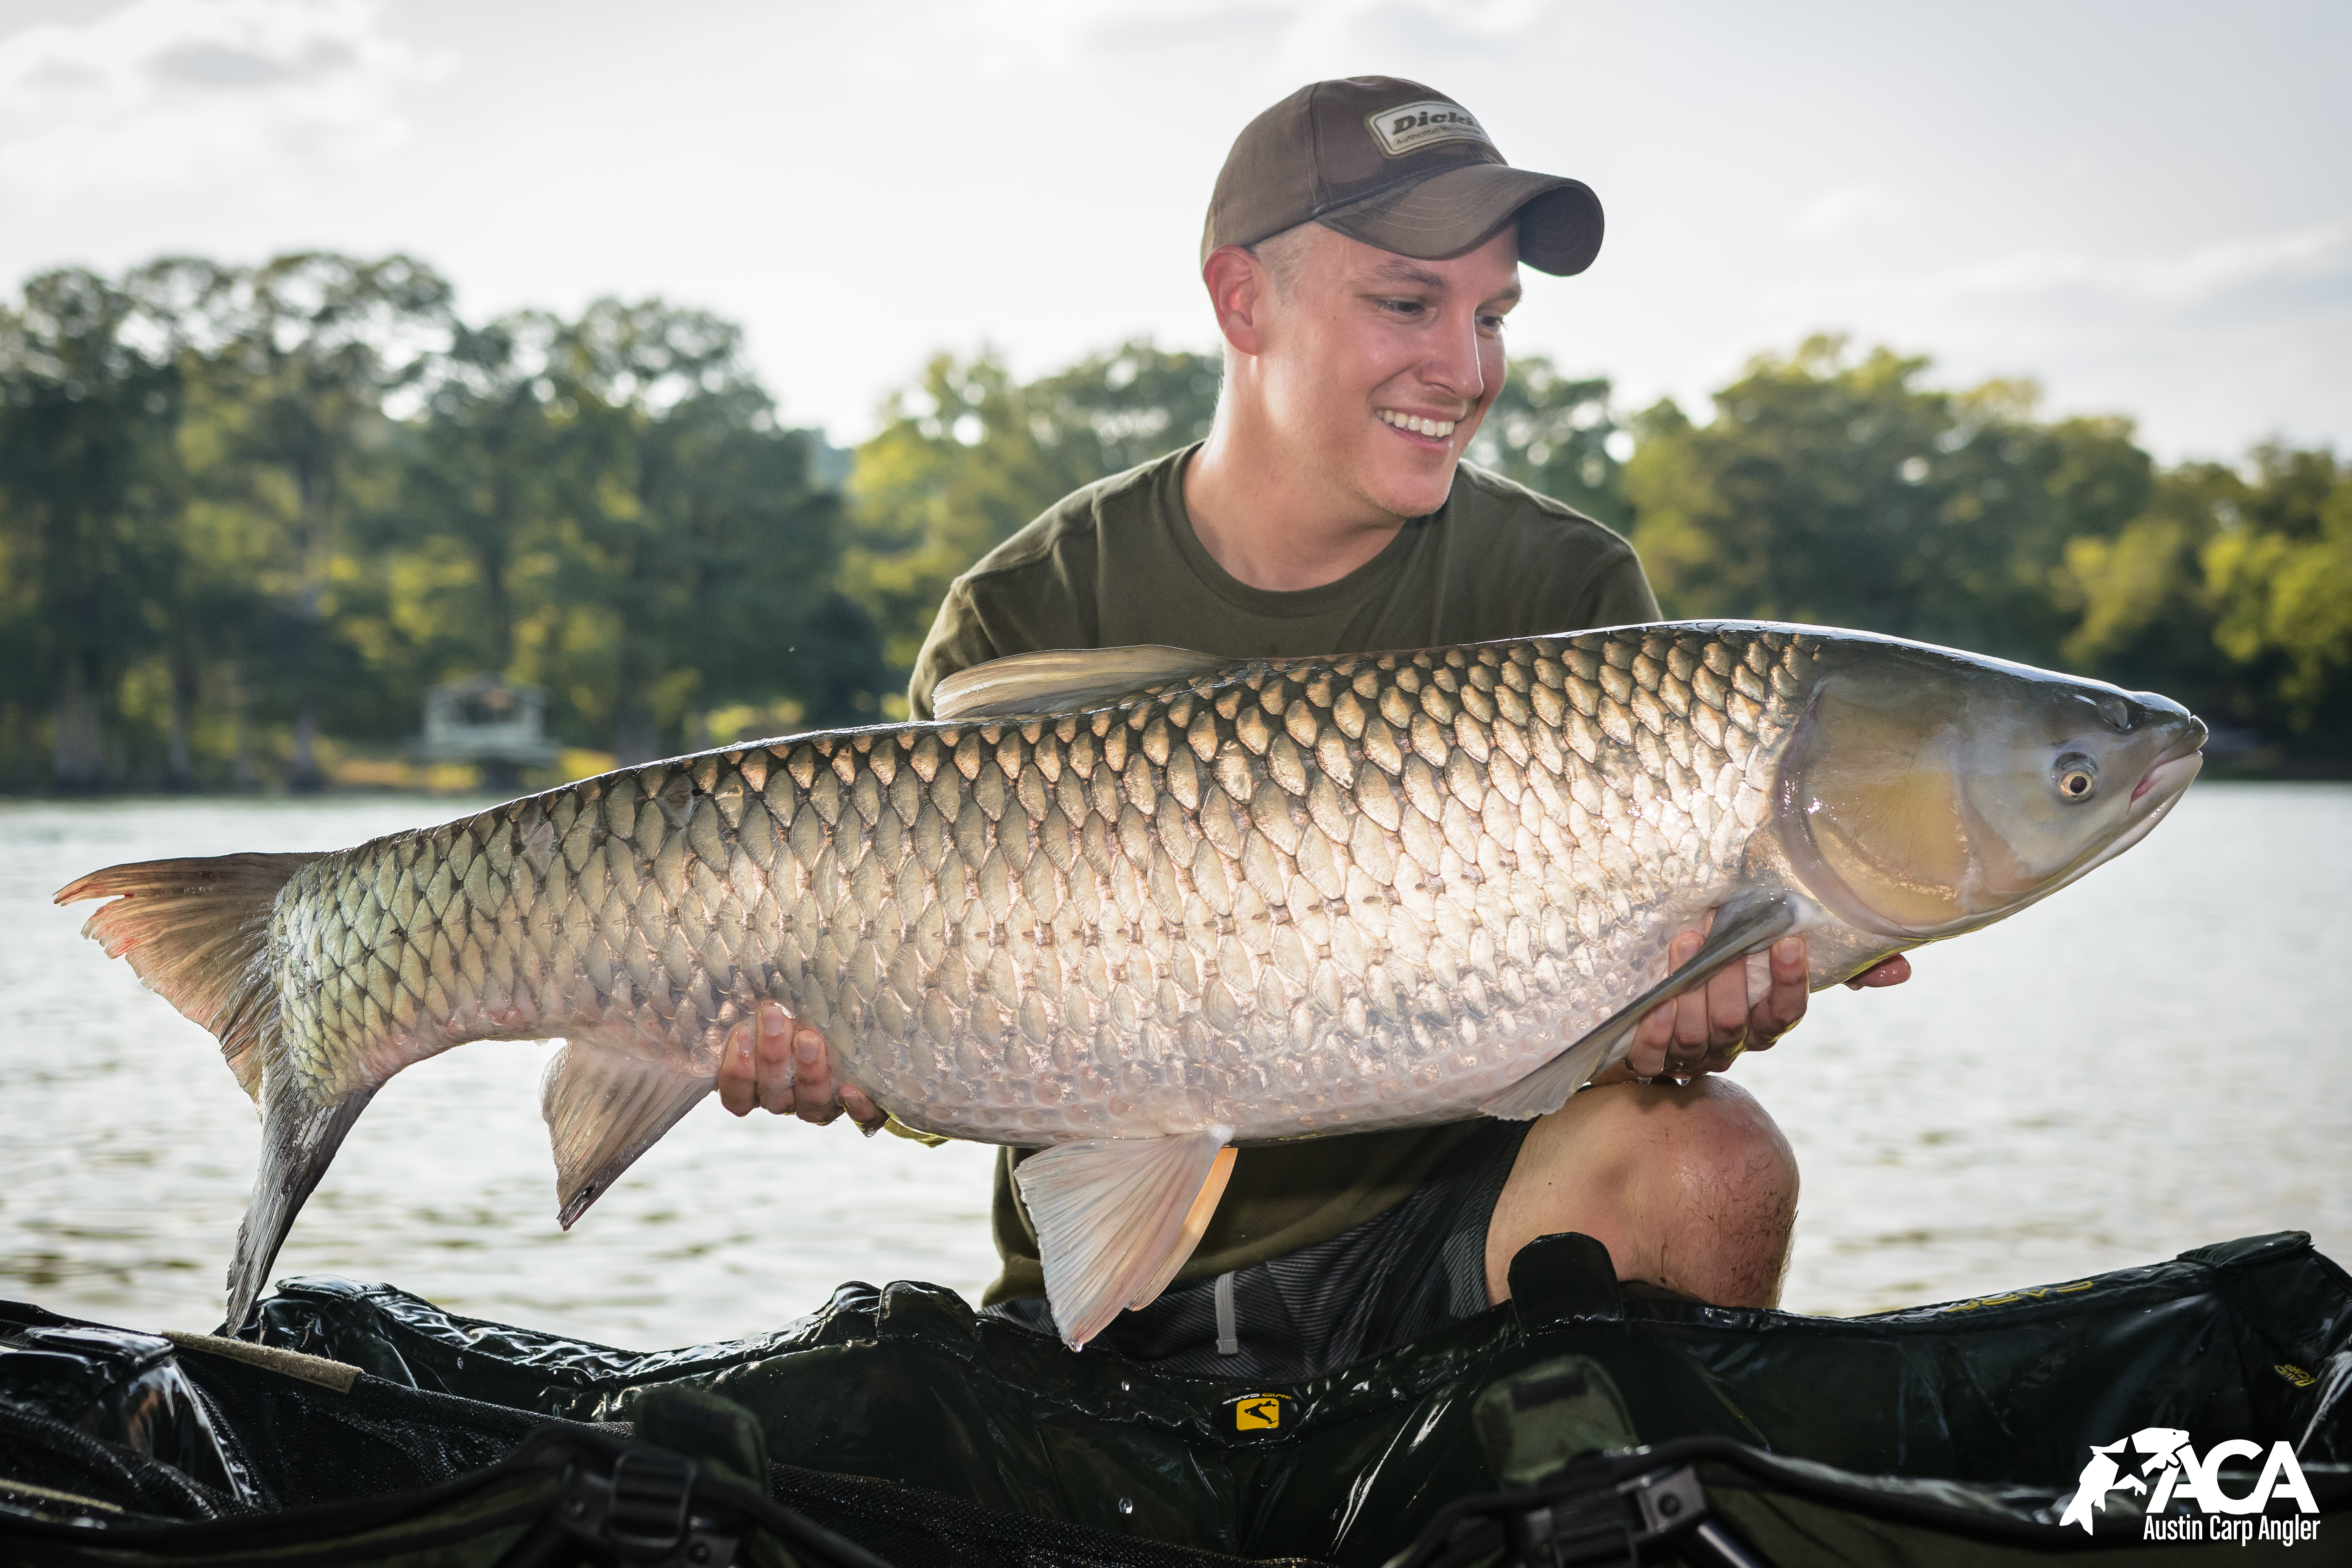 Plan to reduce grass carp in Lake Austin sparks new concerns for